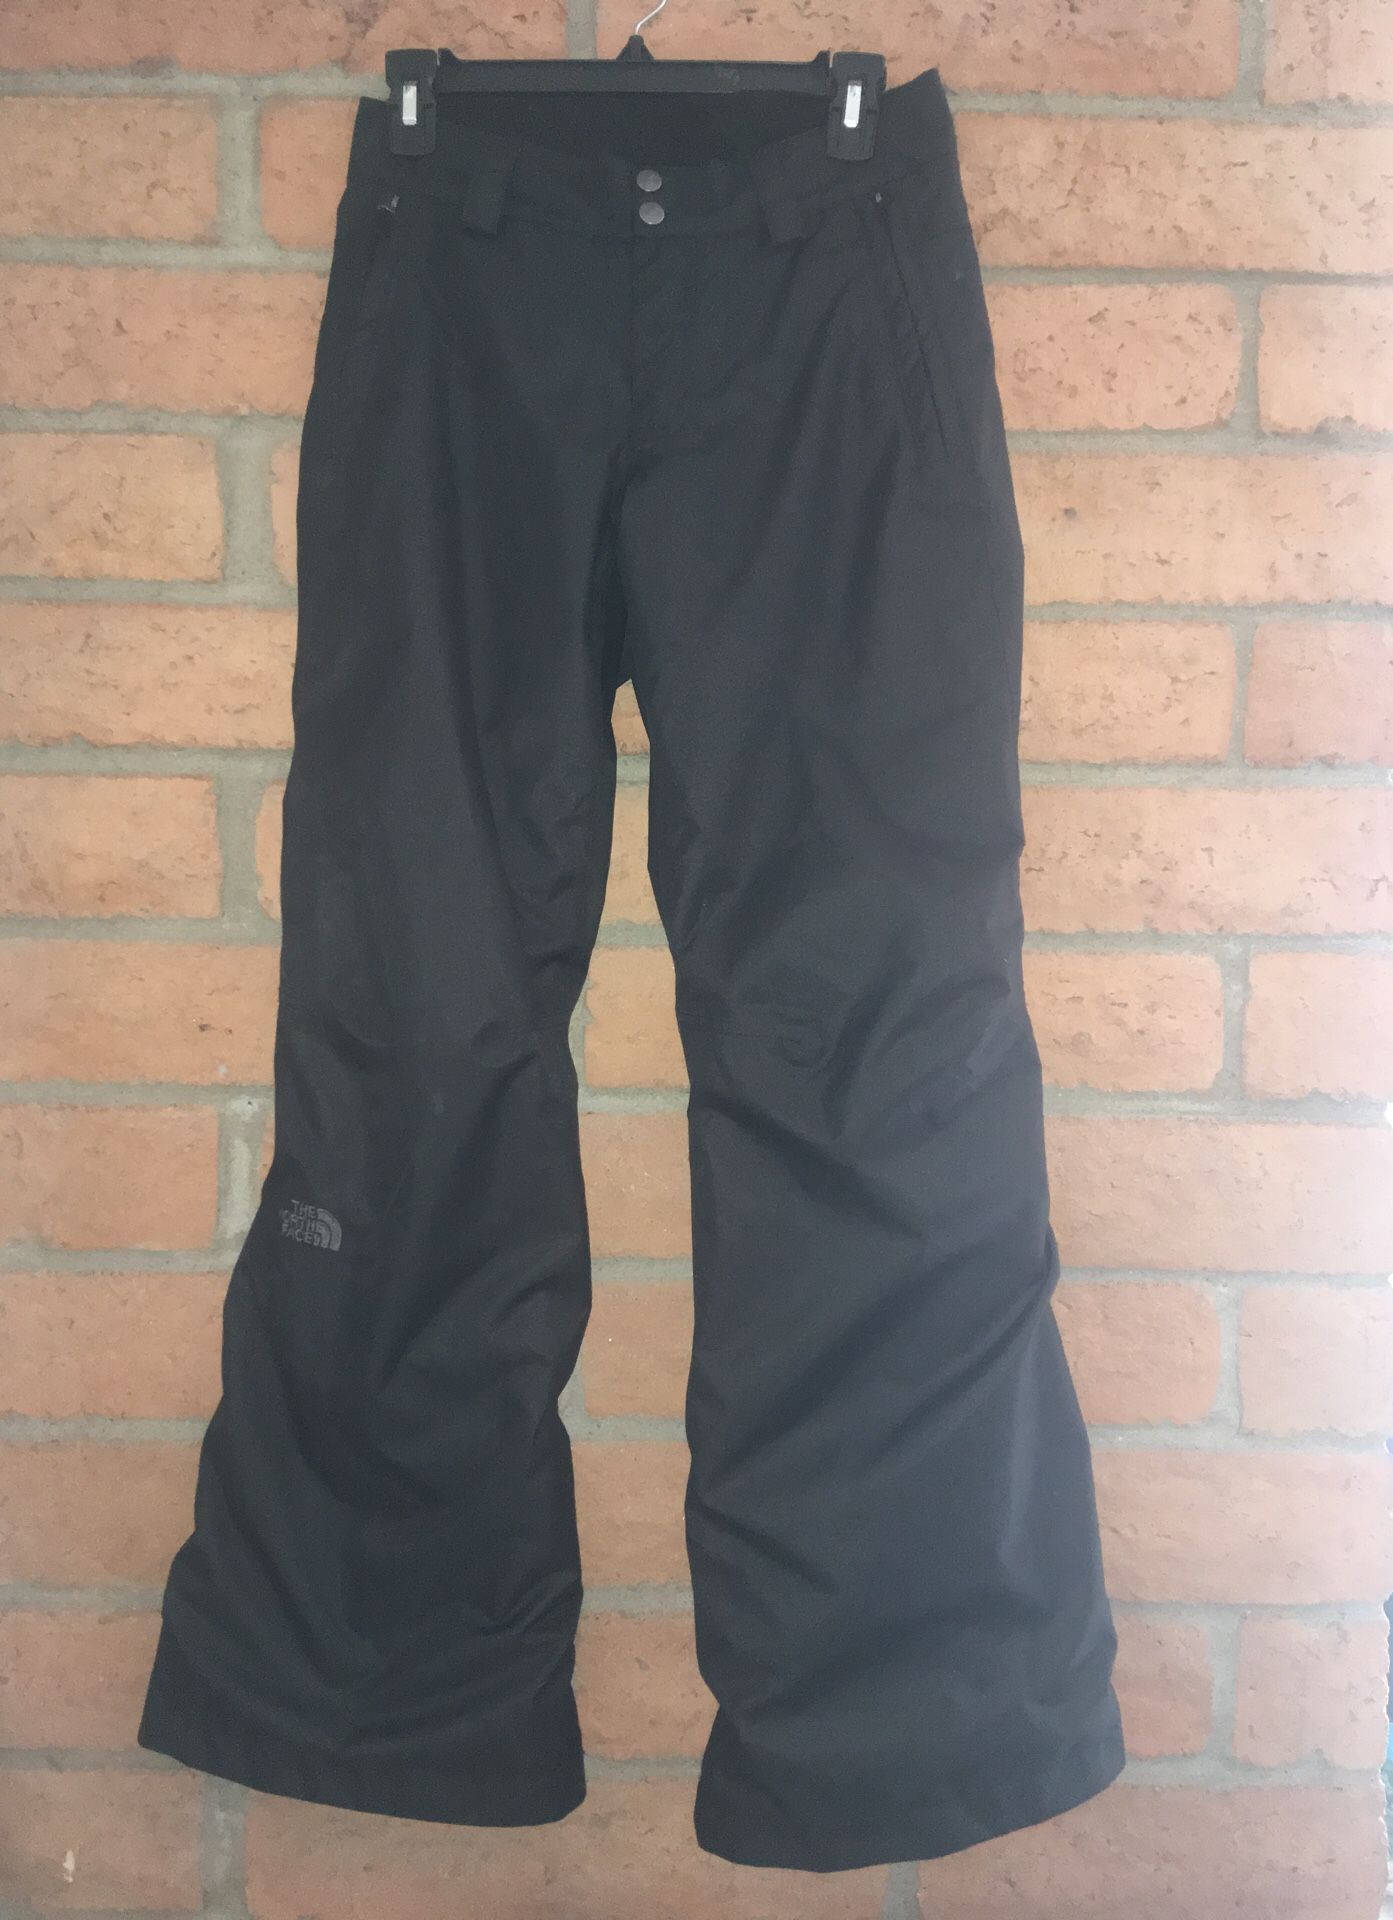 New women’s sally black ski skiing snow pant pants the north face northface xsmall xs extra small patagonia Snowboarding